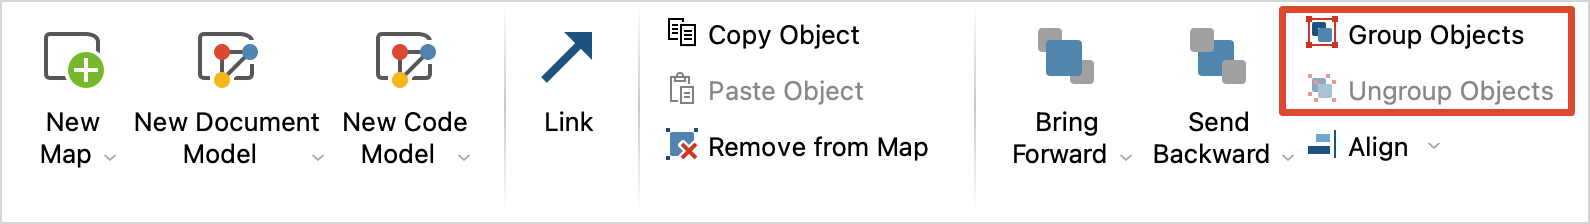 You can group and ungroup objects with the icons framed in red.